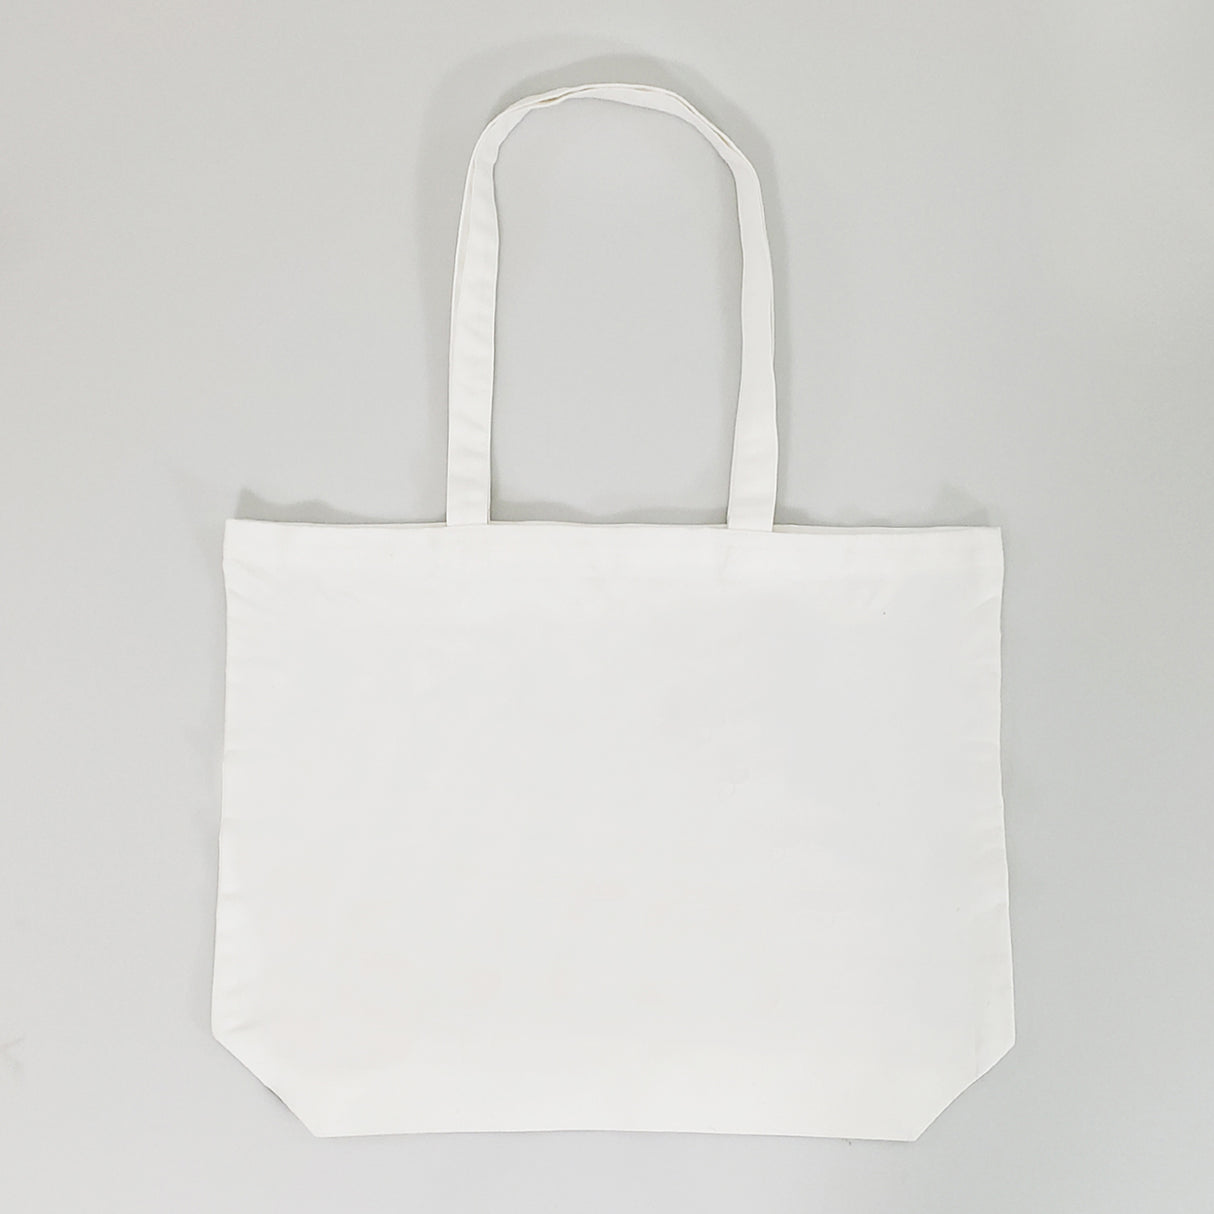 120 ct Large 100% Polyester Canvas Sublimation Tote Bags White - By Case